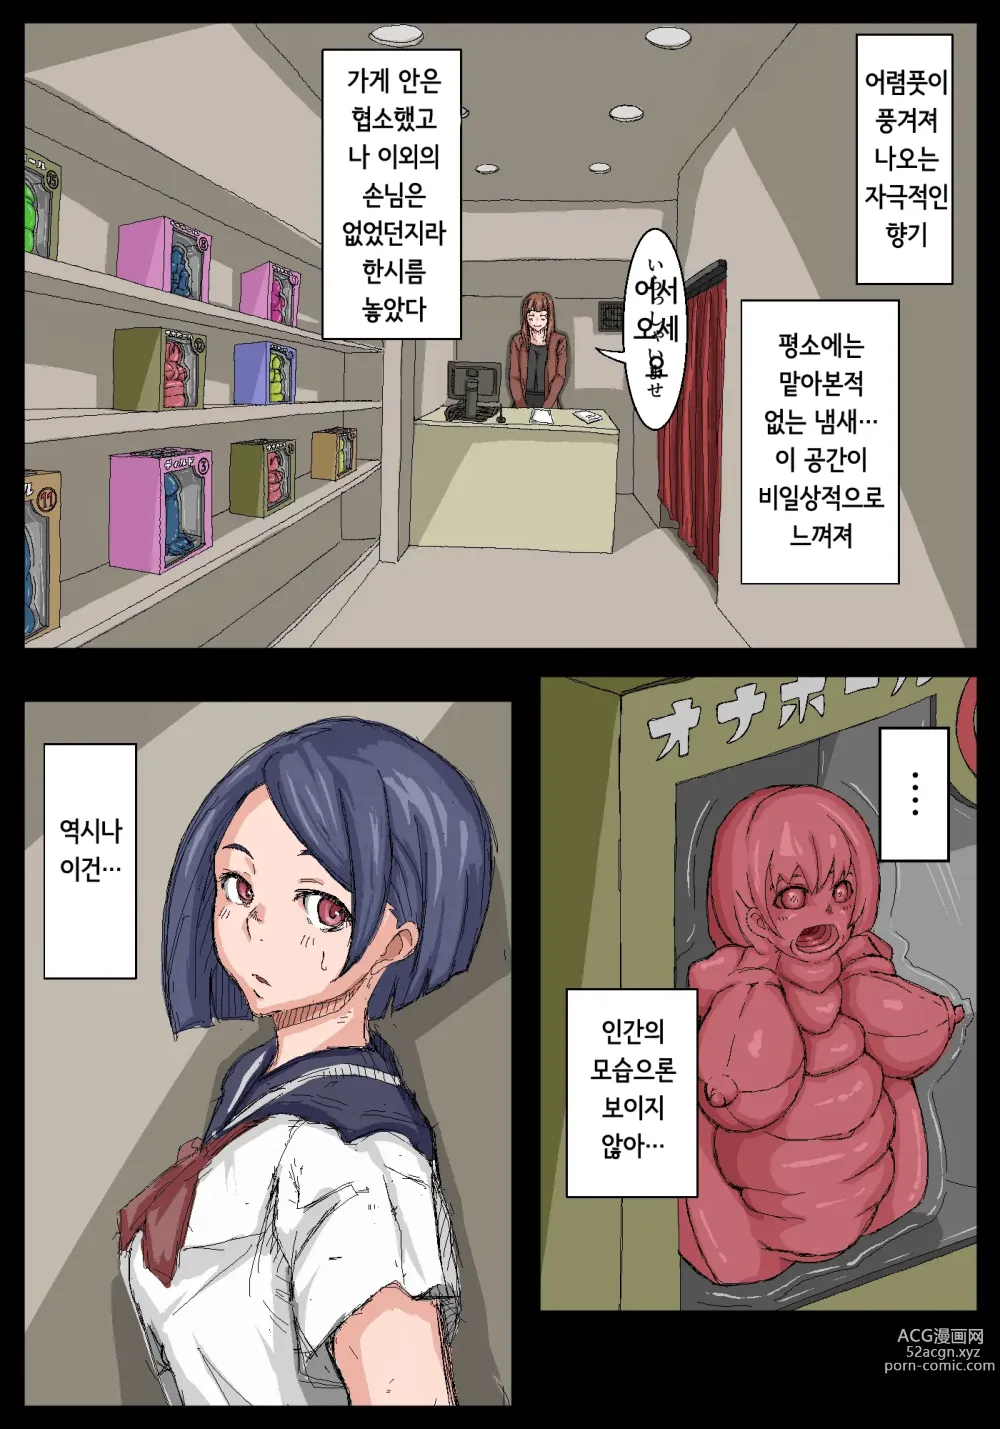 Page 4 of doujinshi 오나홀 선배